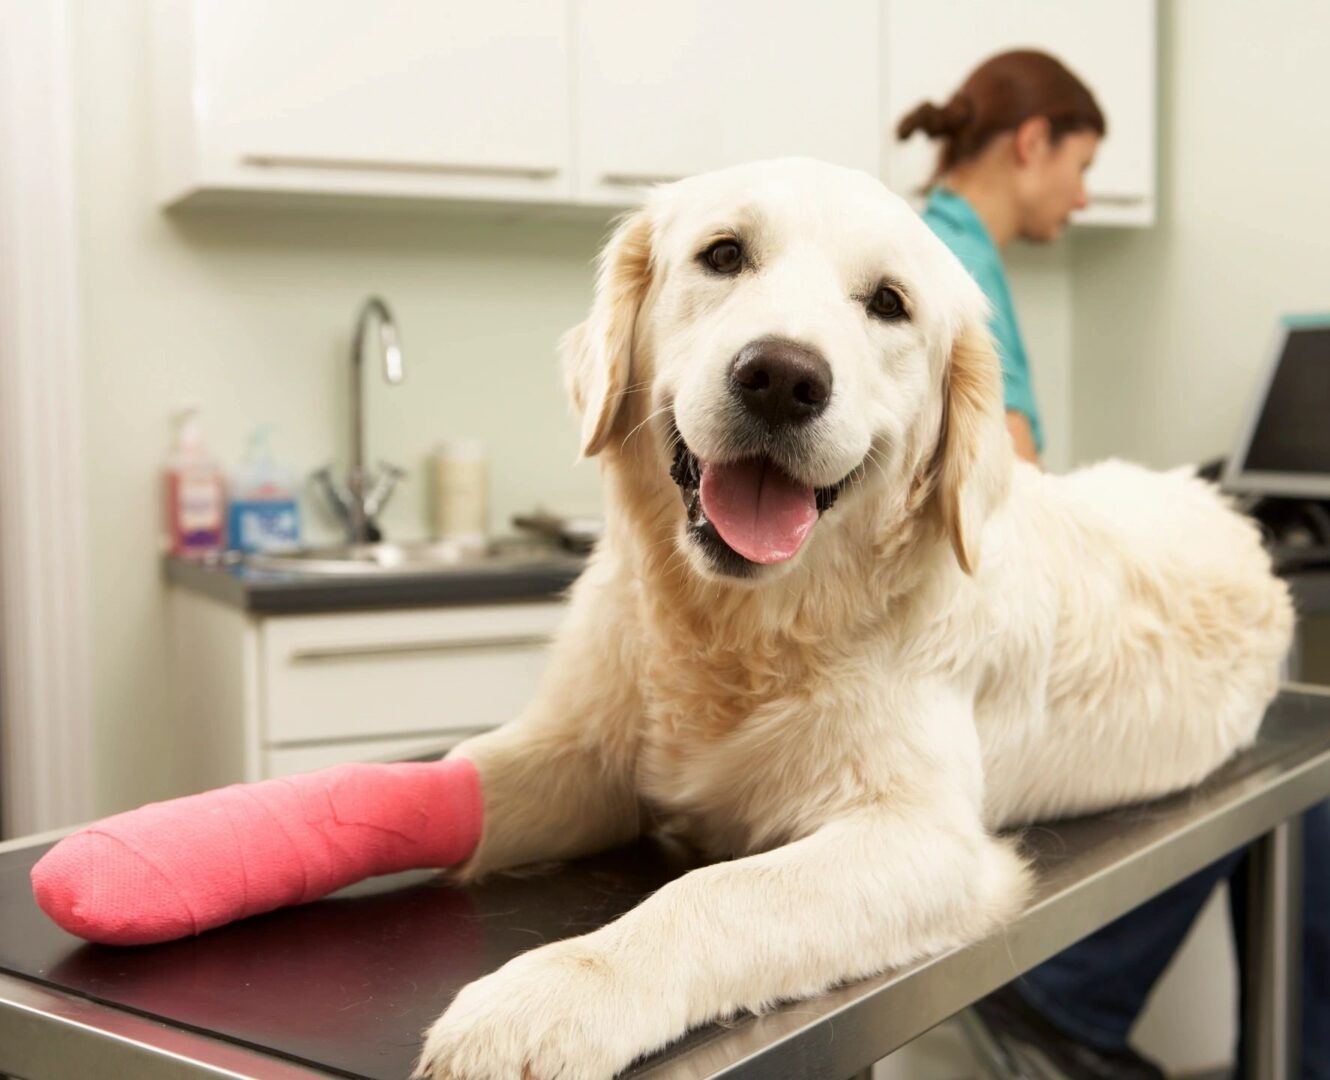 A dog with its leg in plaster on the table.